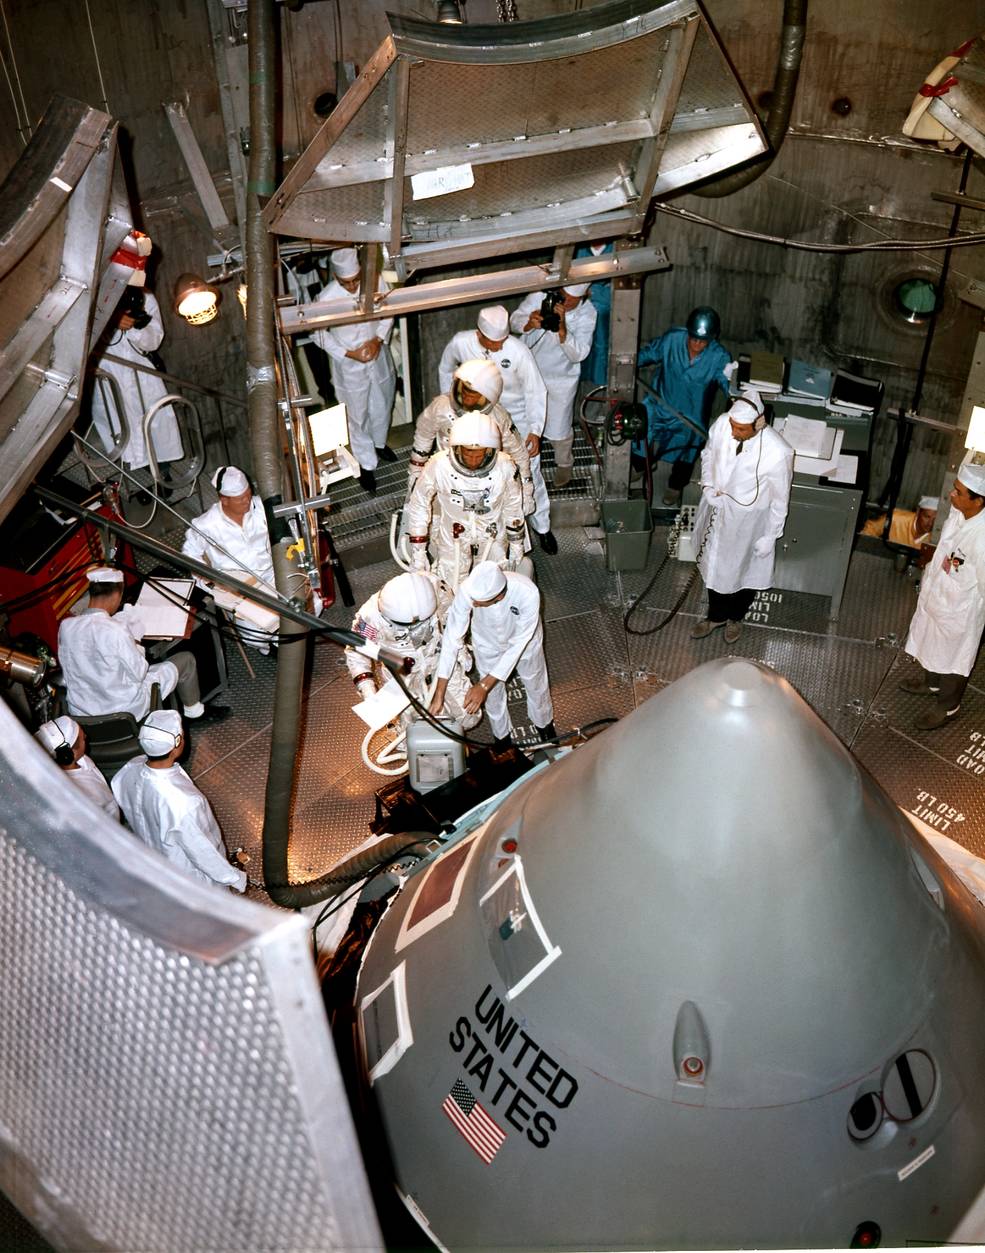 crew_waiting_to_enter_cm_for_alt_chamber_test_at_ksc-10.18.66